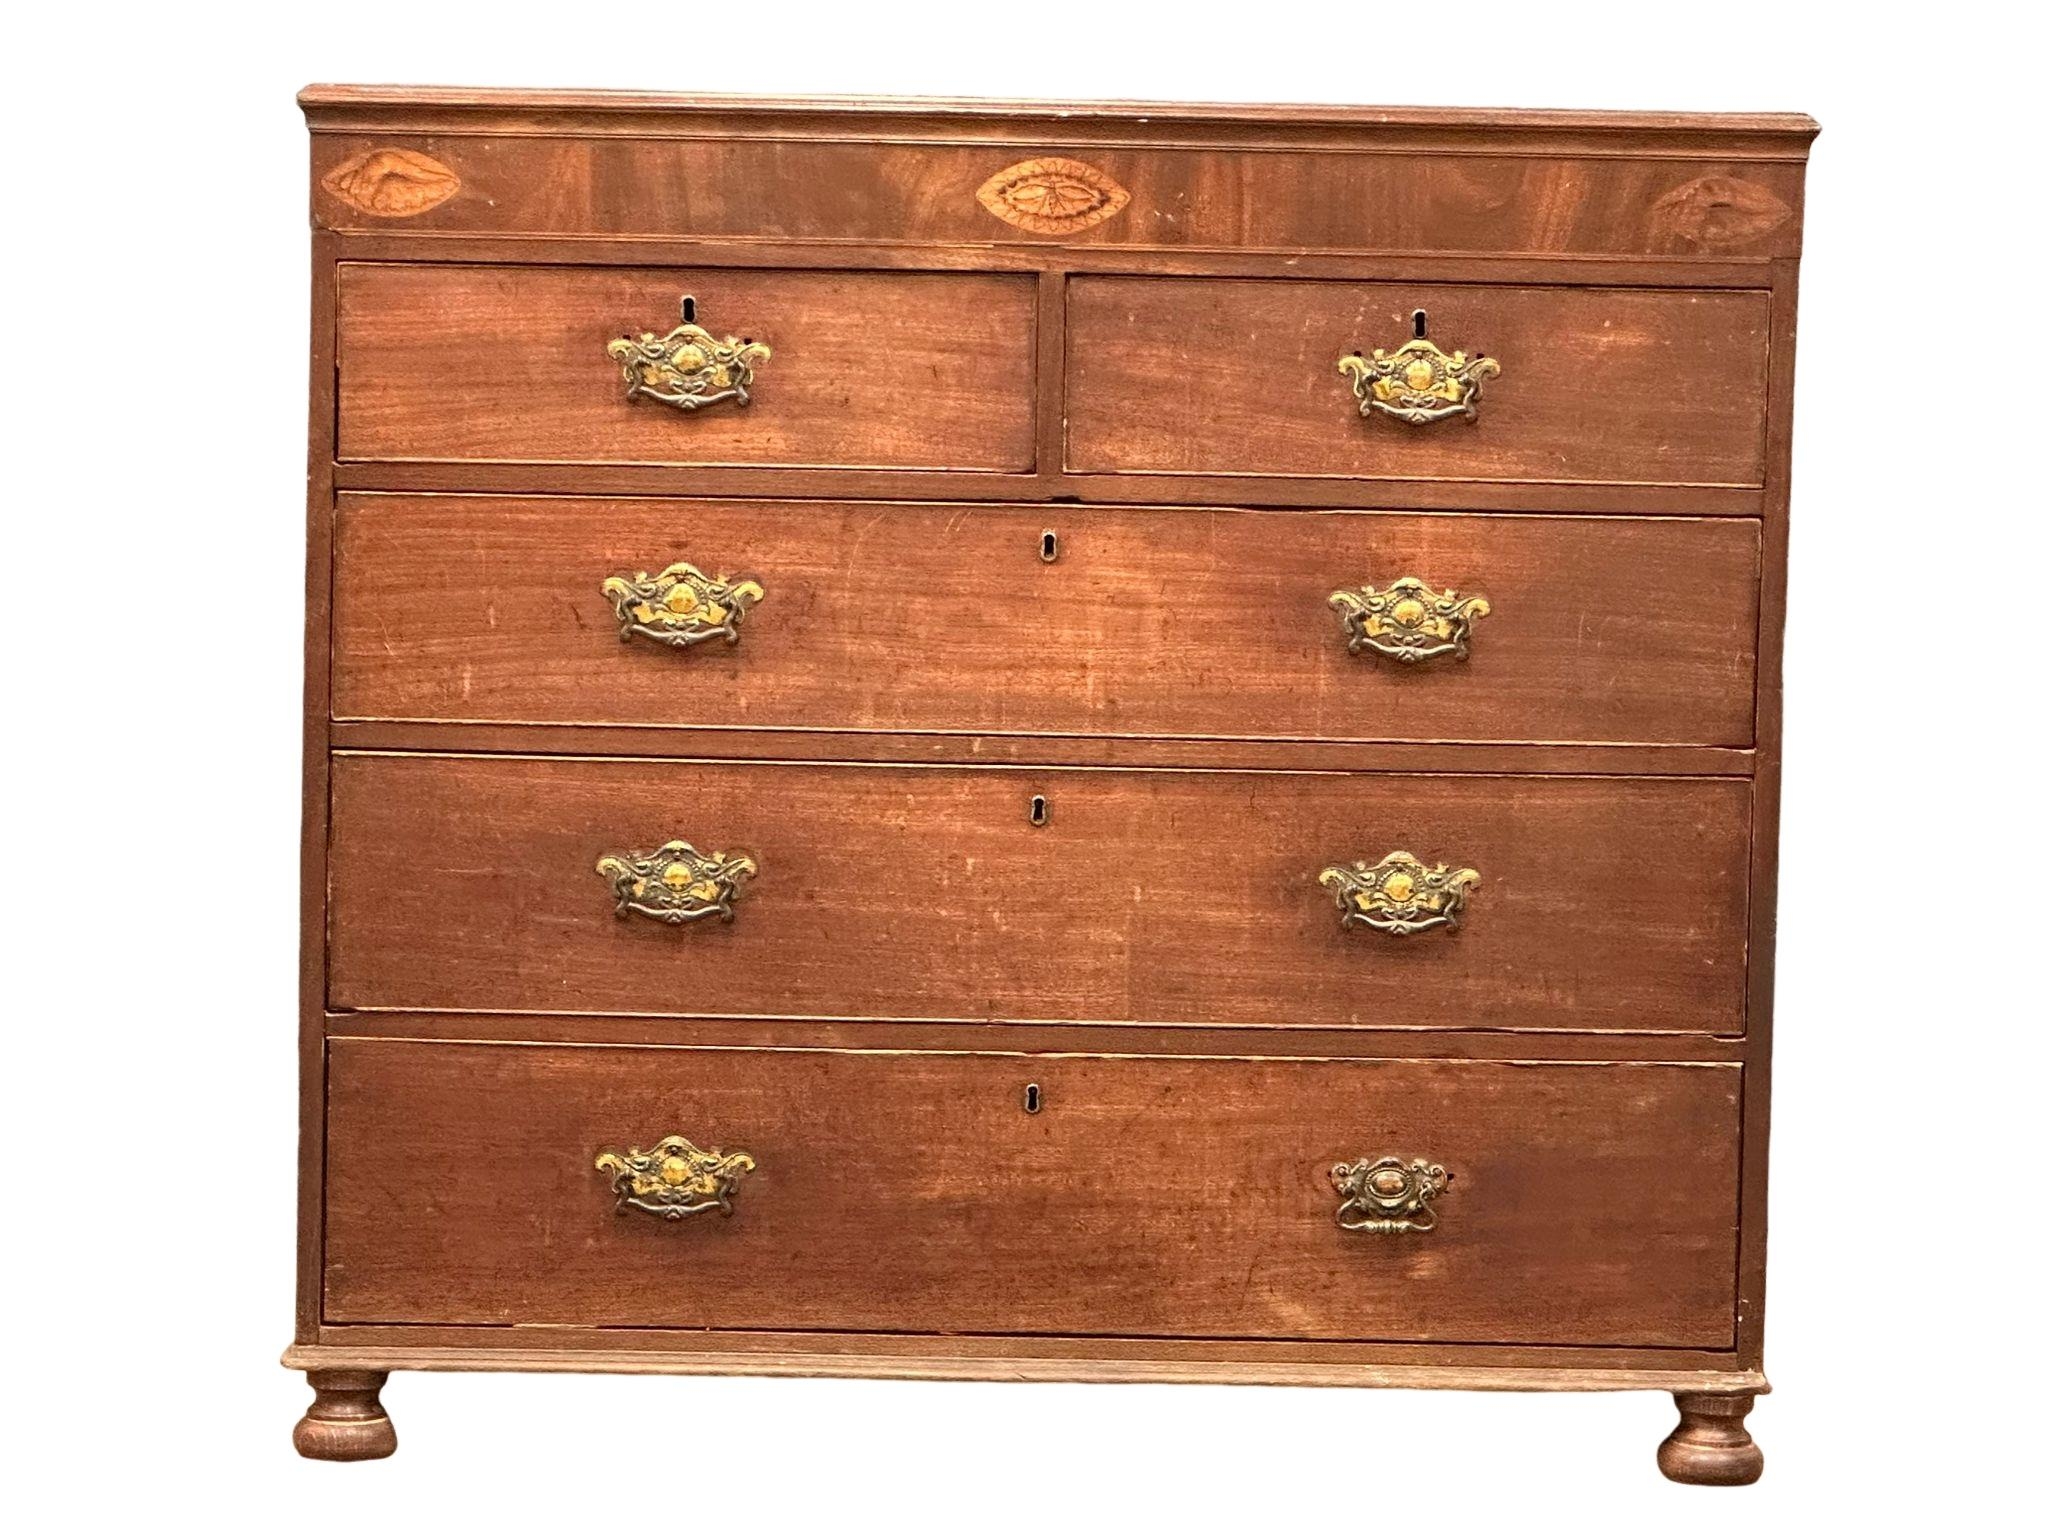 A large late George III Inlaid mahogany chest of drawers, circa 1800-20. 115cm x 55cm x 105cm - Image 5 of 8